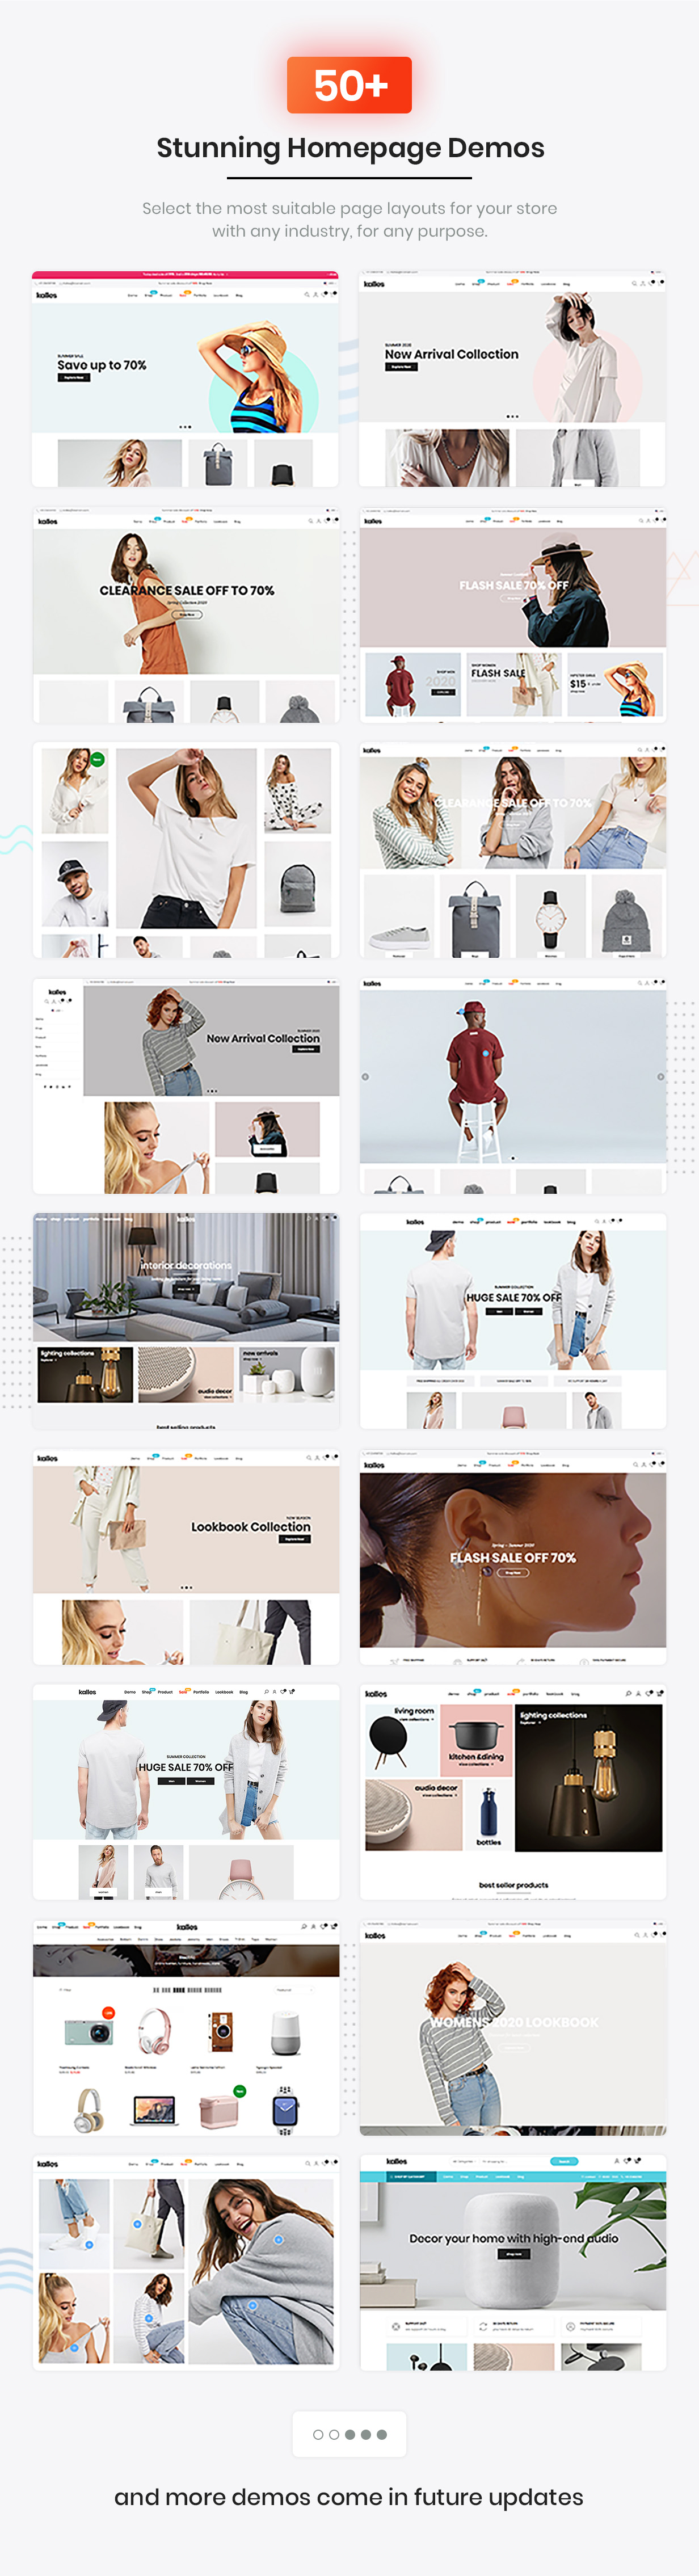 Kalles supported 20+ awesome demos, the best Shopify theme